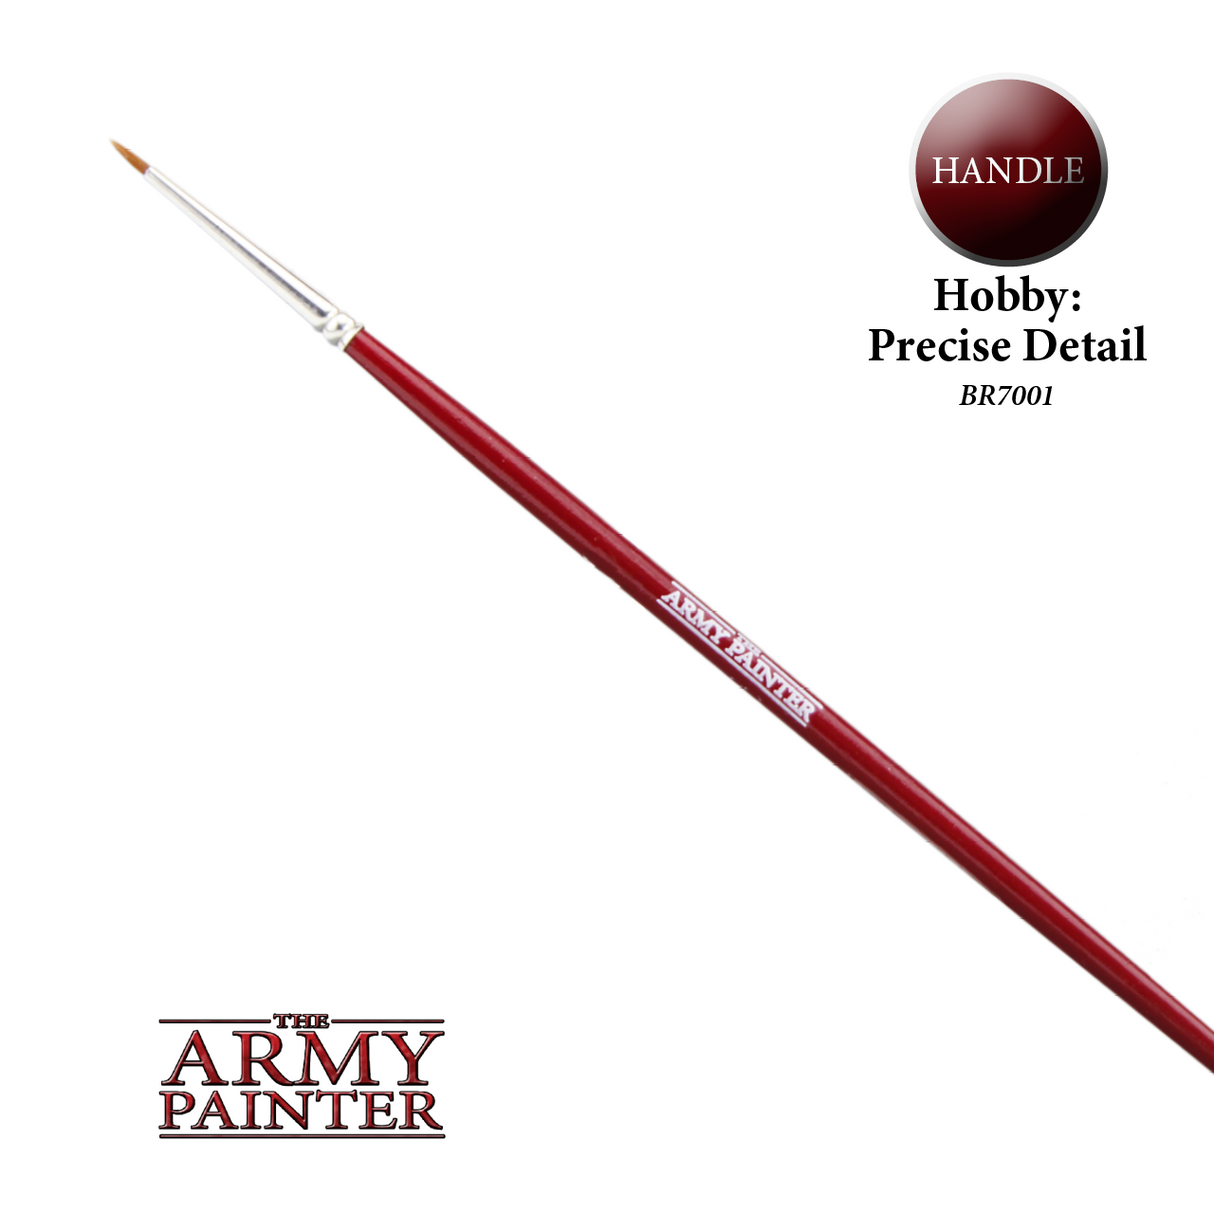 Army Painter BR7001 Hobby: Precise Detail Brush The Army Painter PAINT, BRUSHES & SUPPLIES